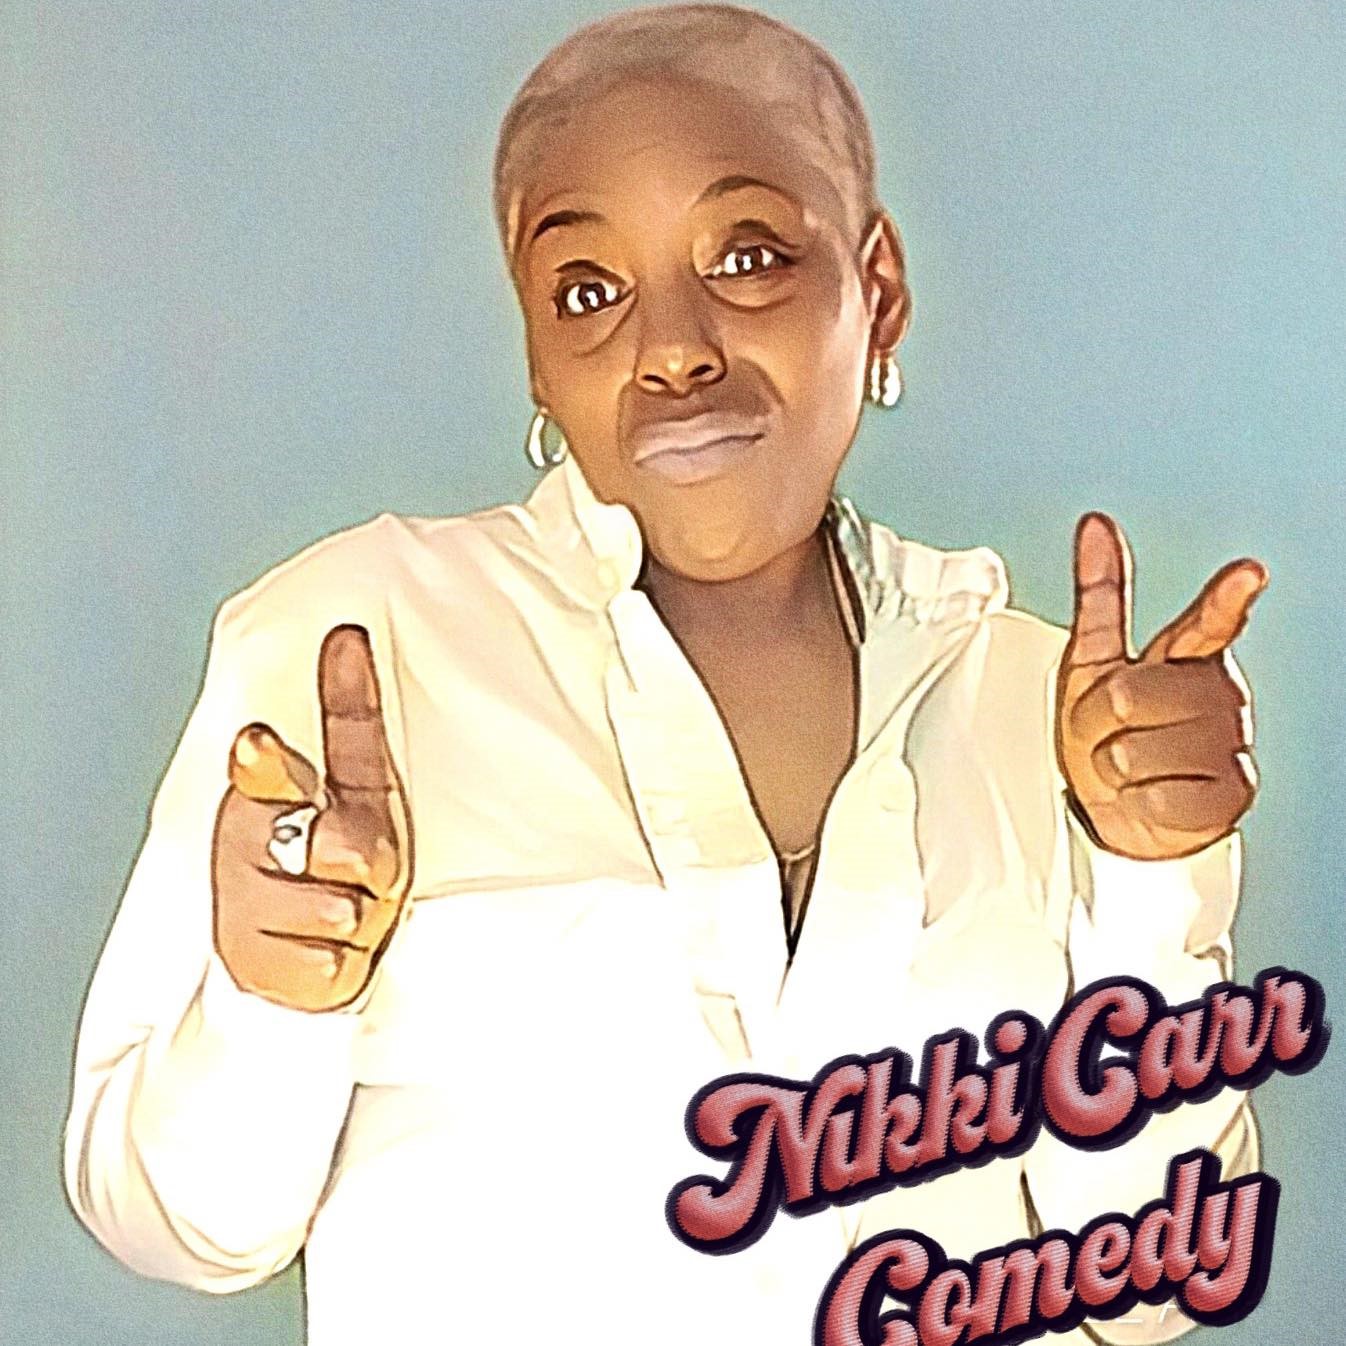 Nikki Carr Sat. 7:30PM Show Funny Stop Comedy Club on Feb 10, 19:30@Funny Stop Comedy Club - Buy tickets and Get information on Funny Stop funnystop.online